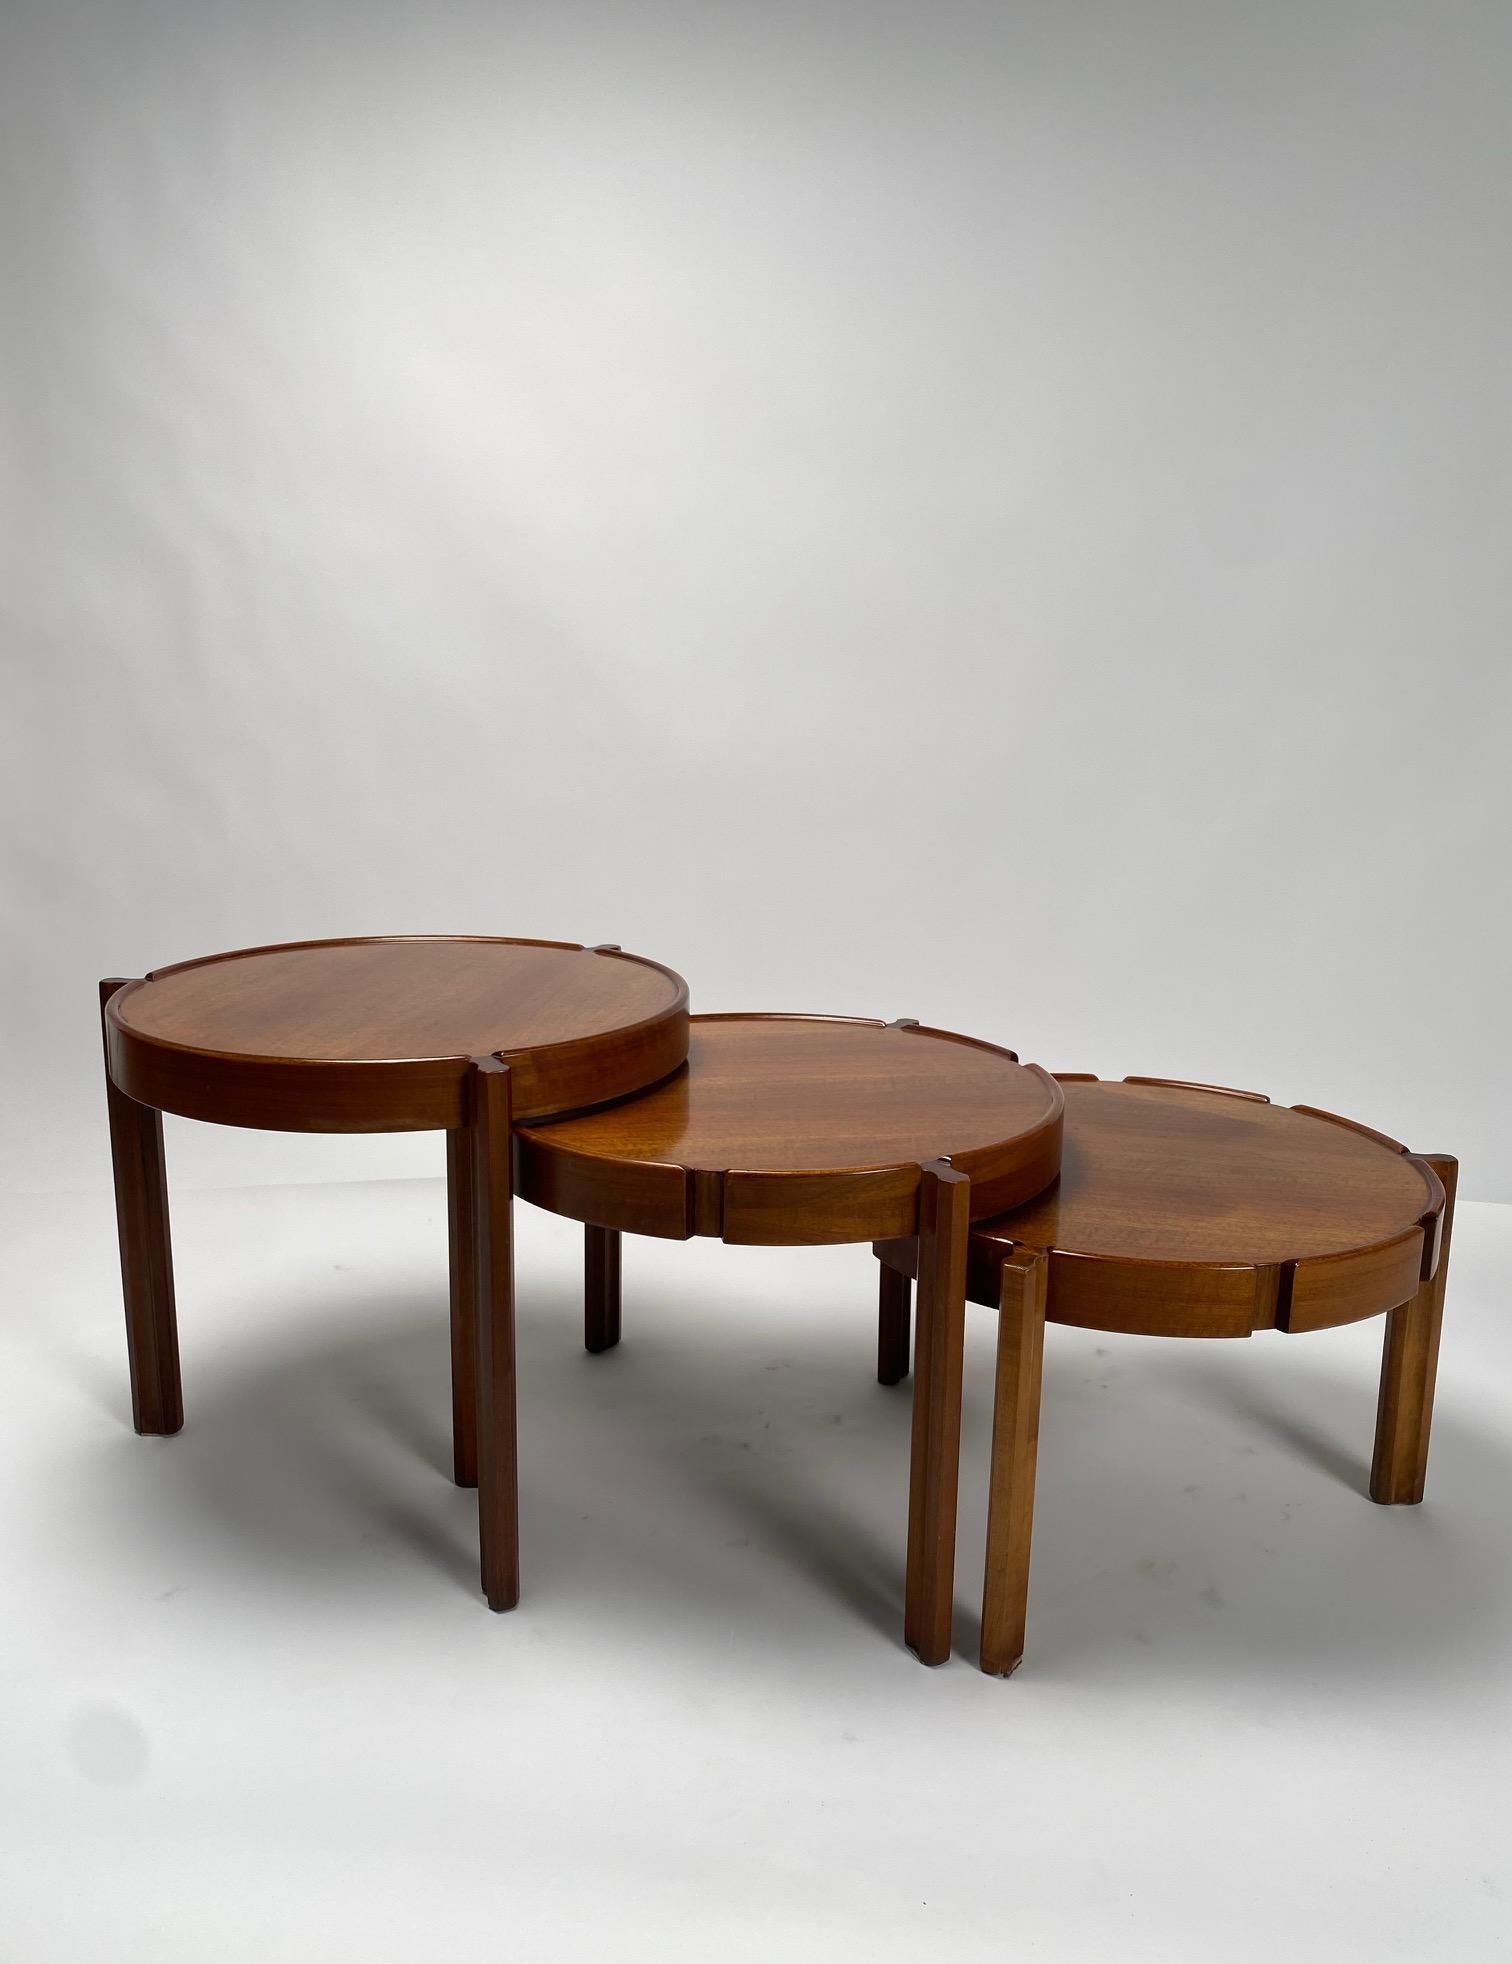 Italian Set of three Wooden Nesting Tables, Italy 1950s For Sale